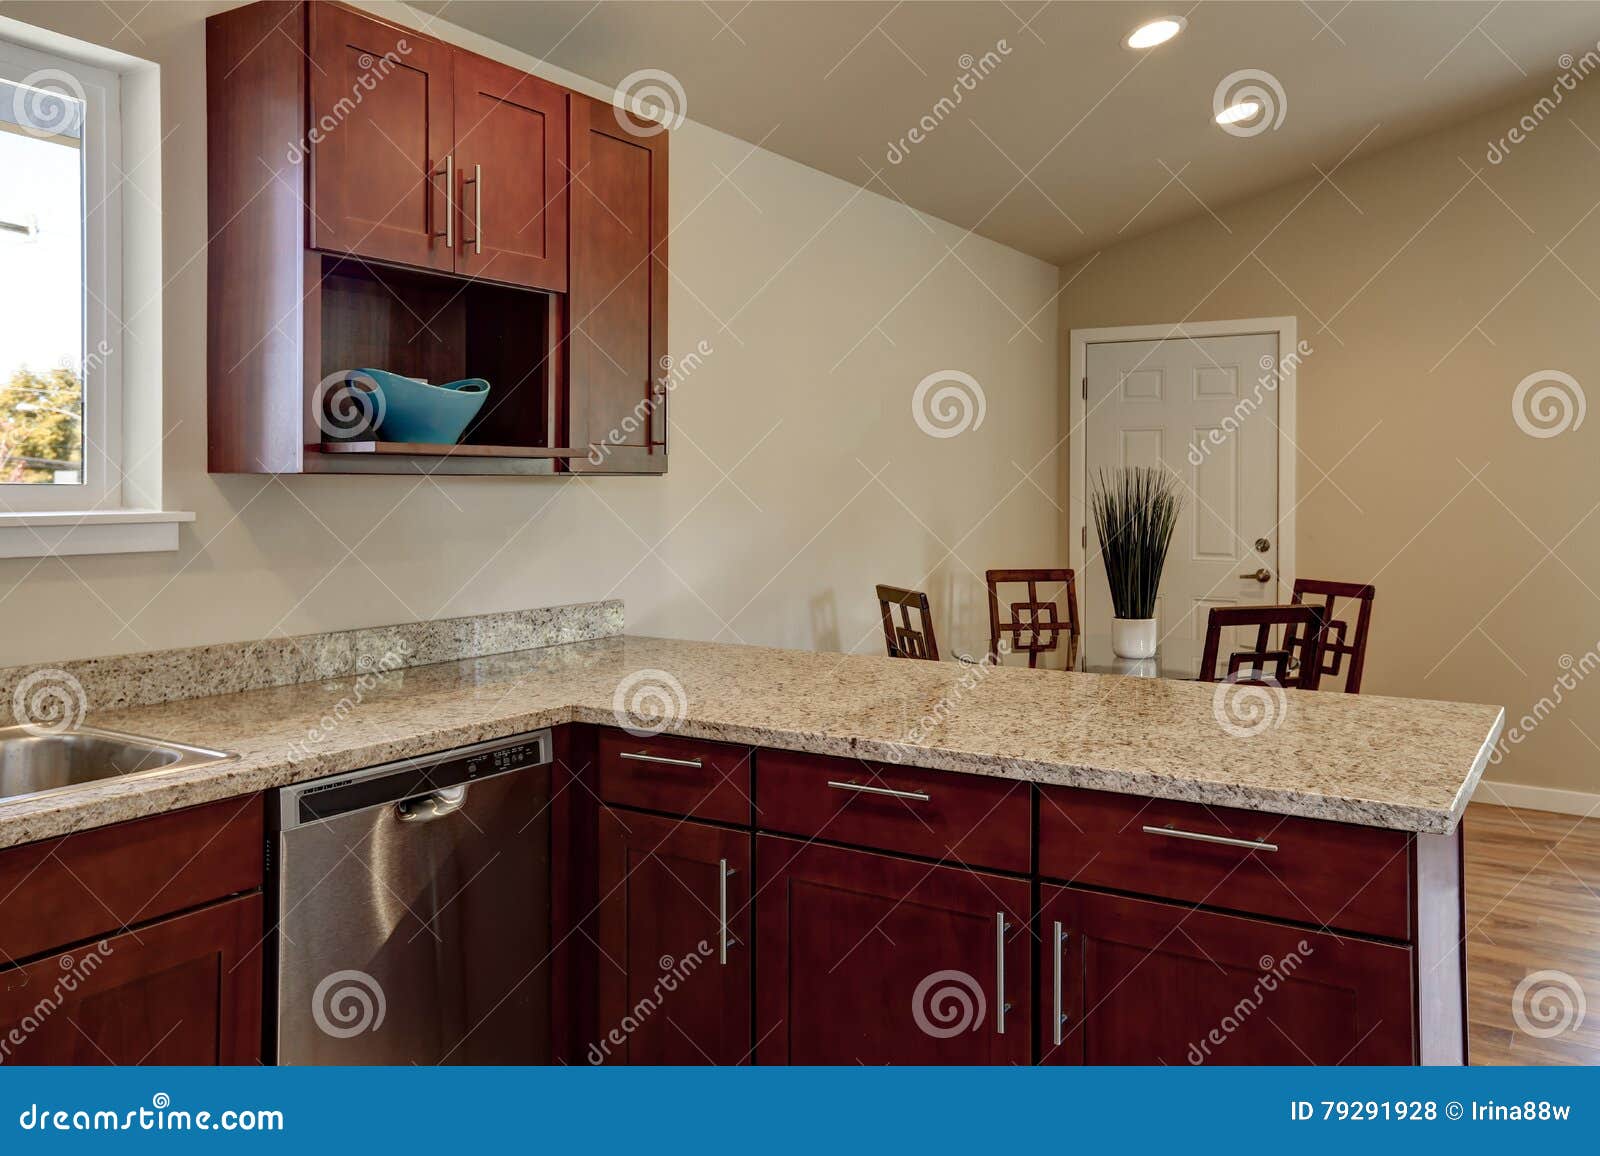 View Of Burgundy Kitchen Cabinets With Granite Counter Top Stock